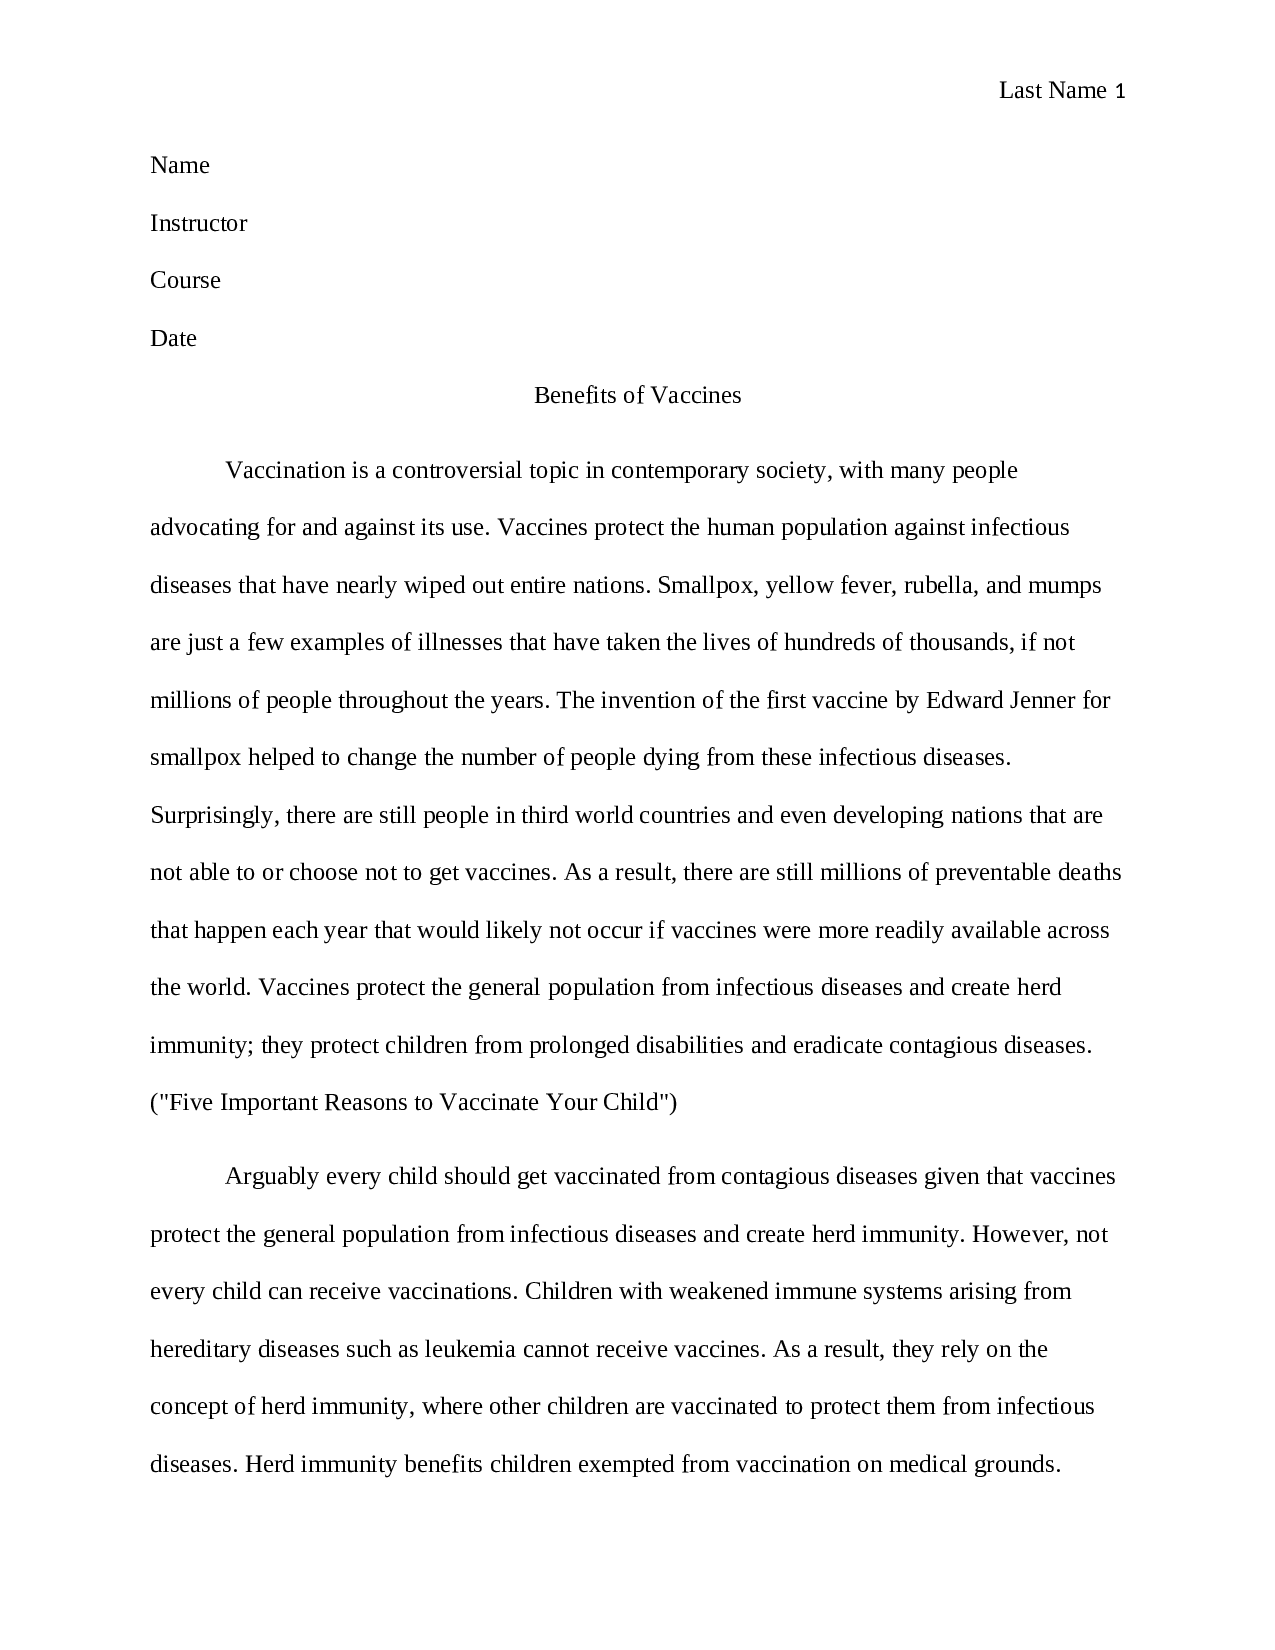 new york times expository essay